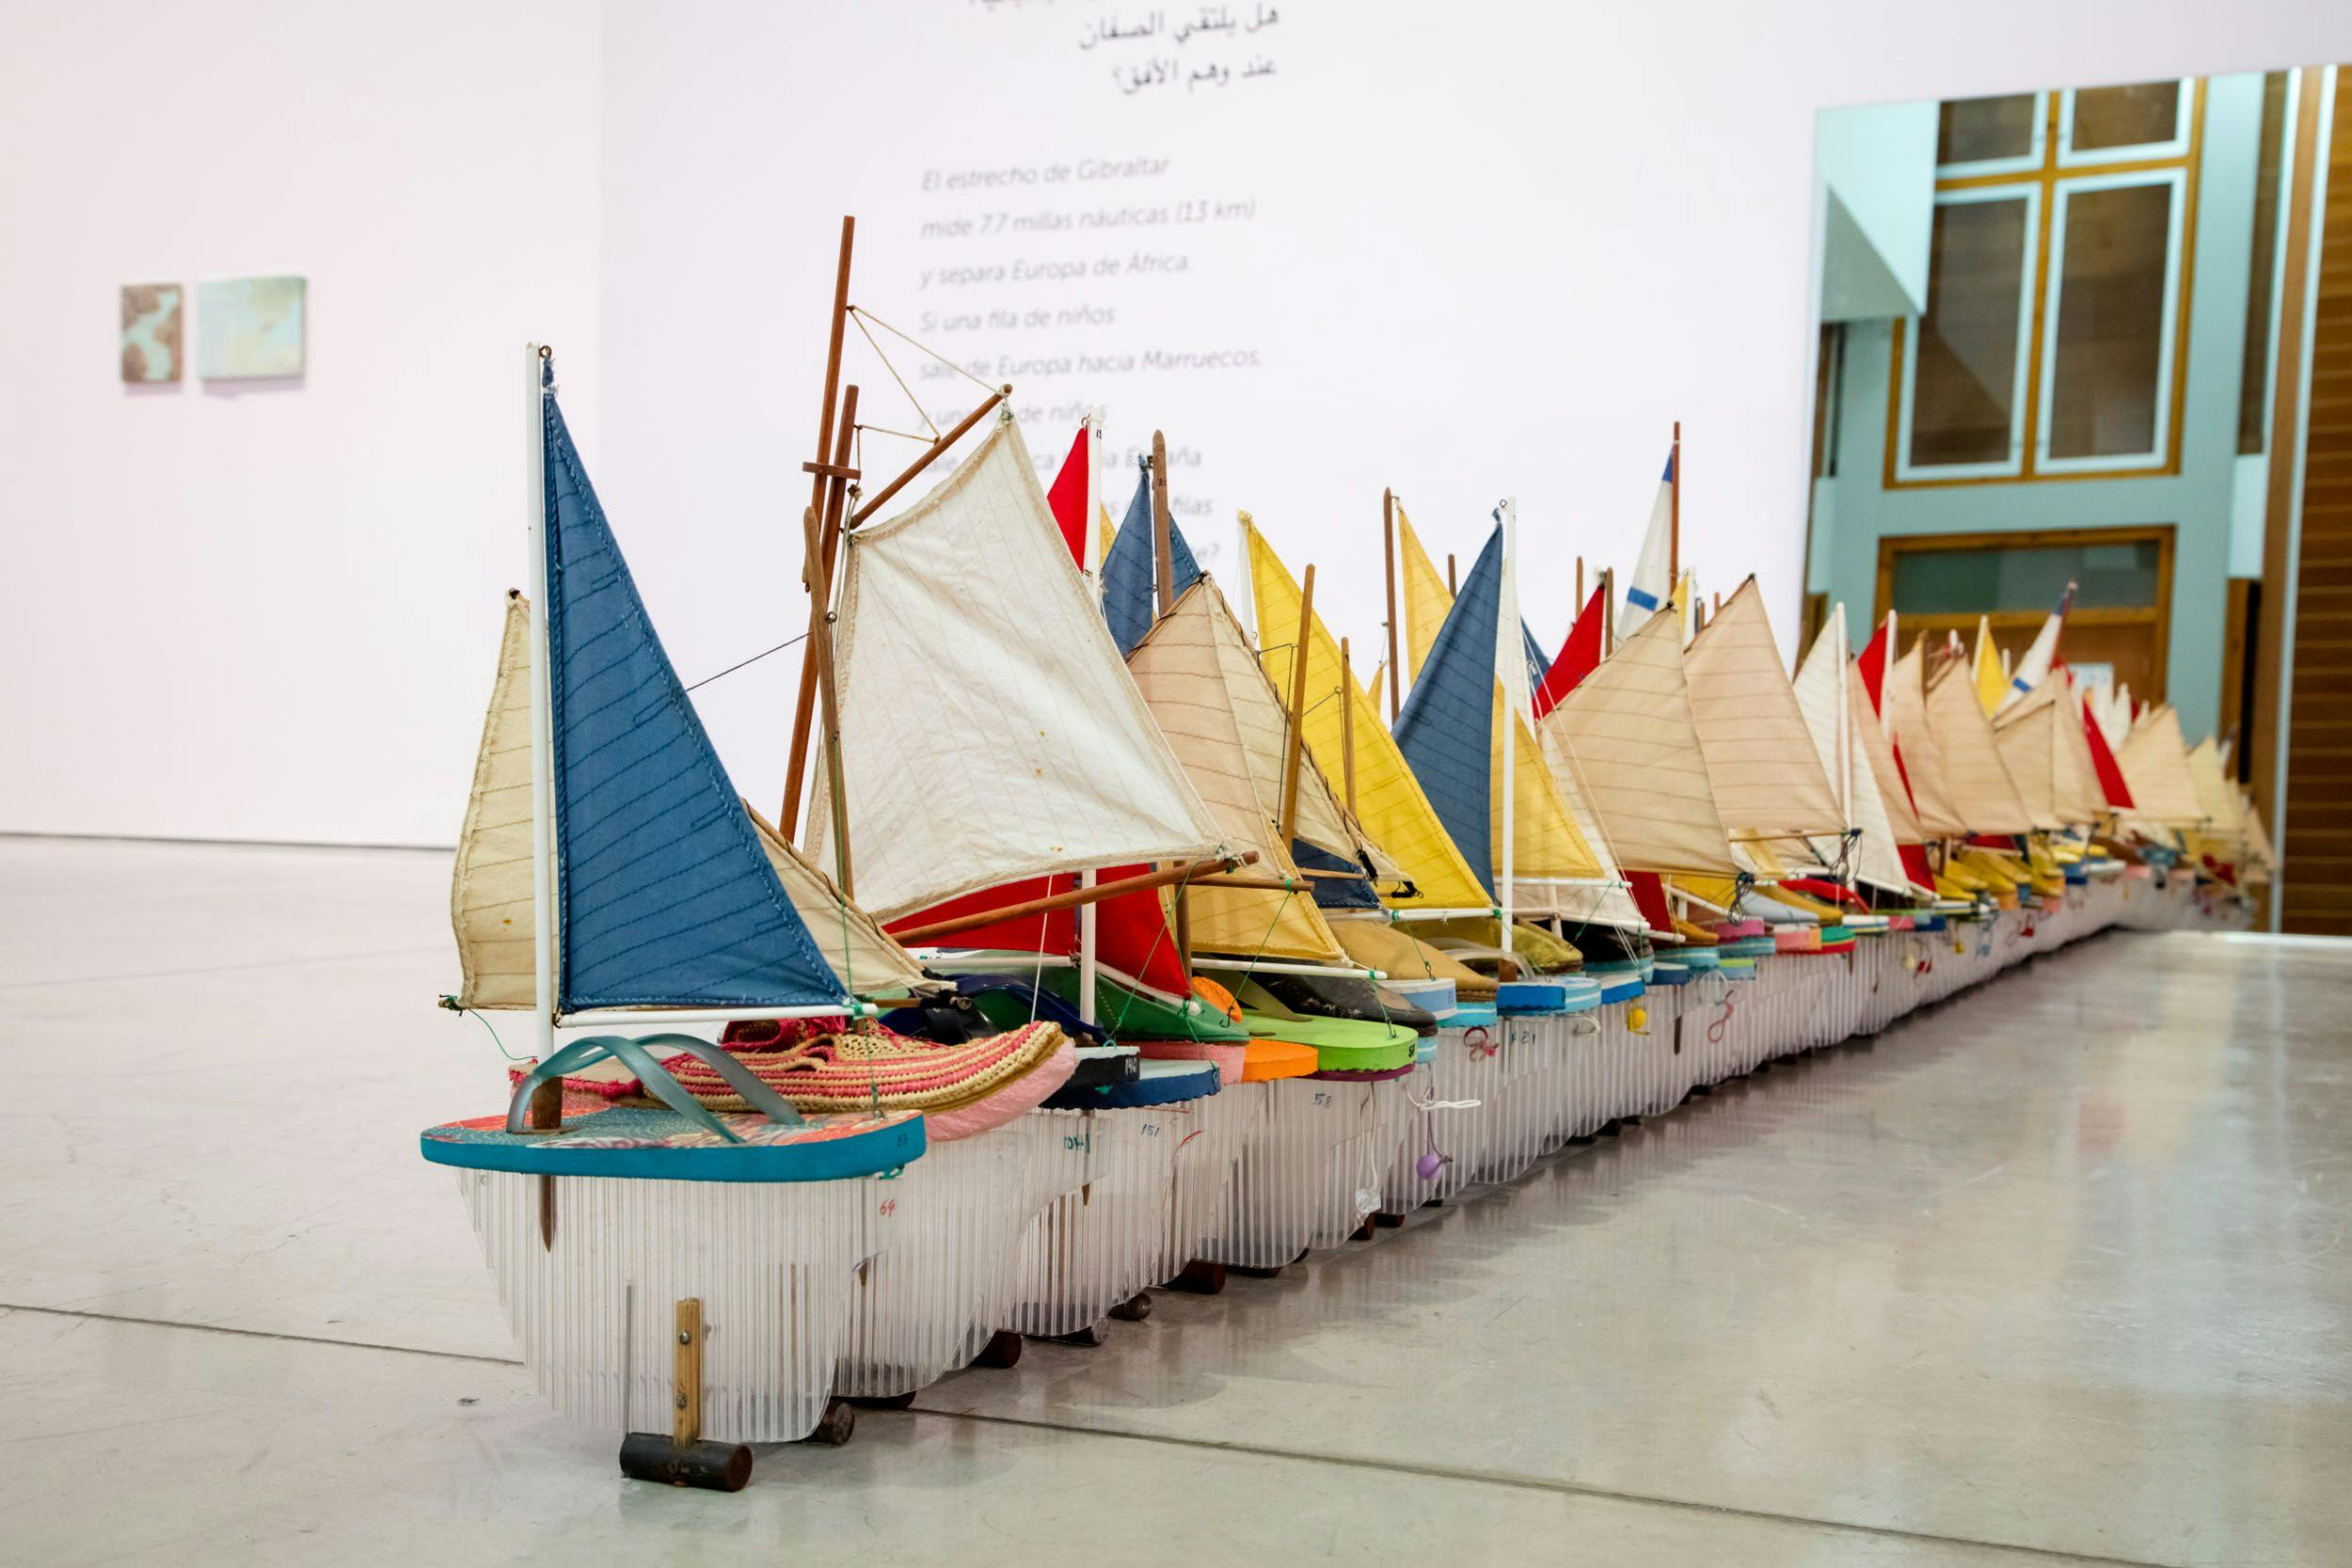 Installation view of the exhibition A Story of Negotiation¬†at the Art Gallery of Ontario, Toronto, dated 2016 to 2017.